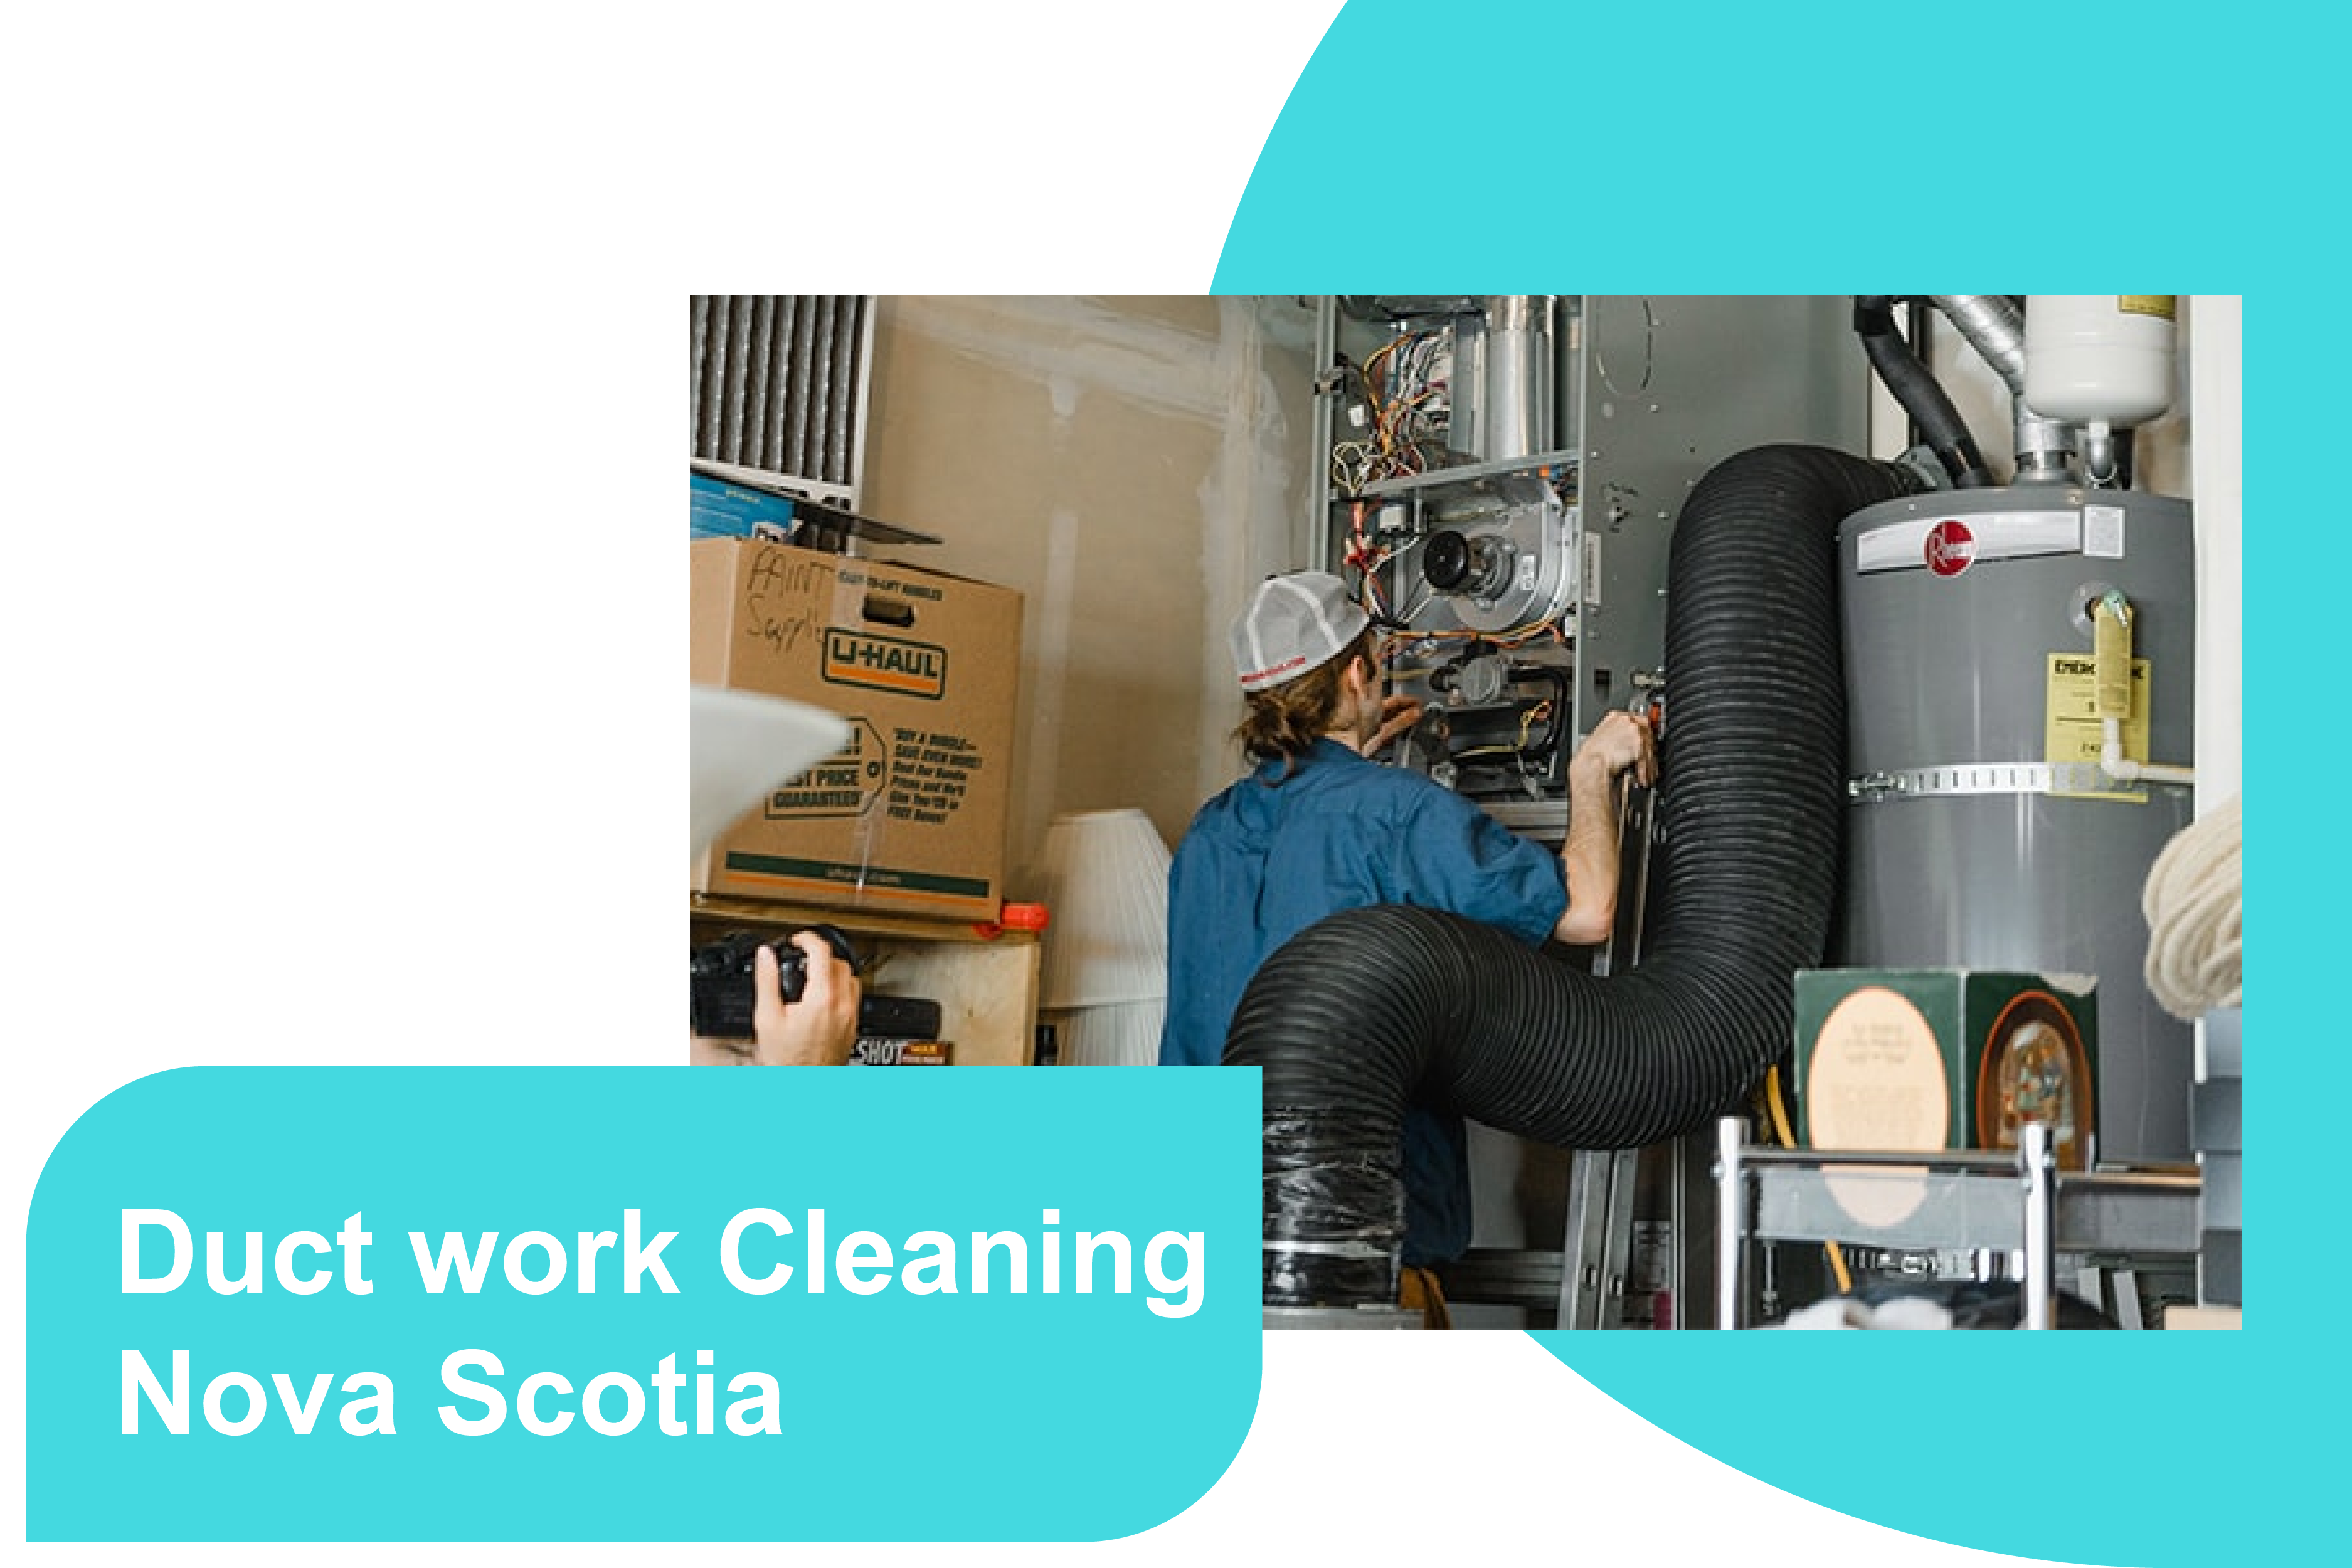 ductwork cleaning Nova Scotia